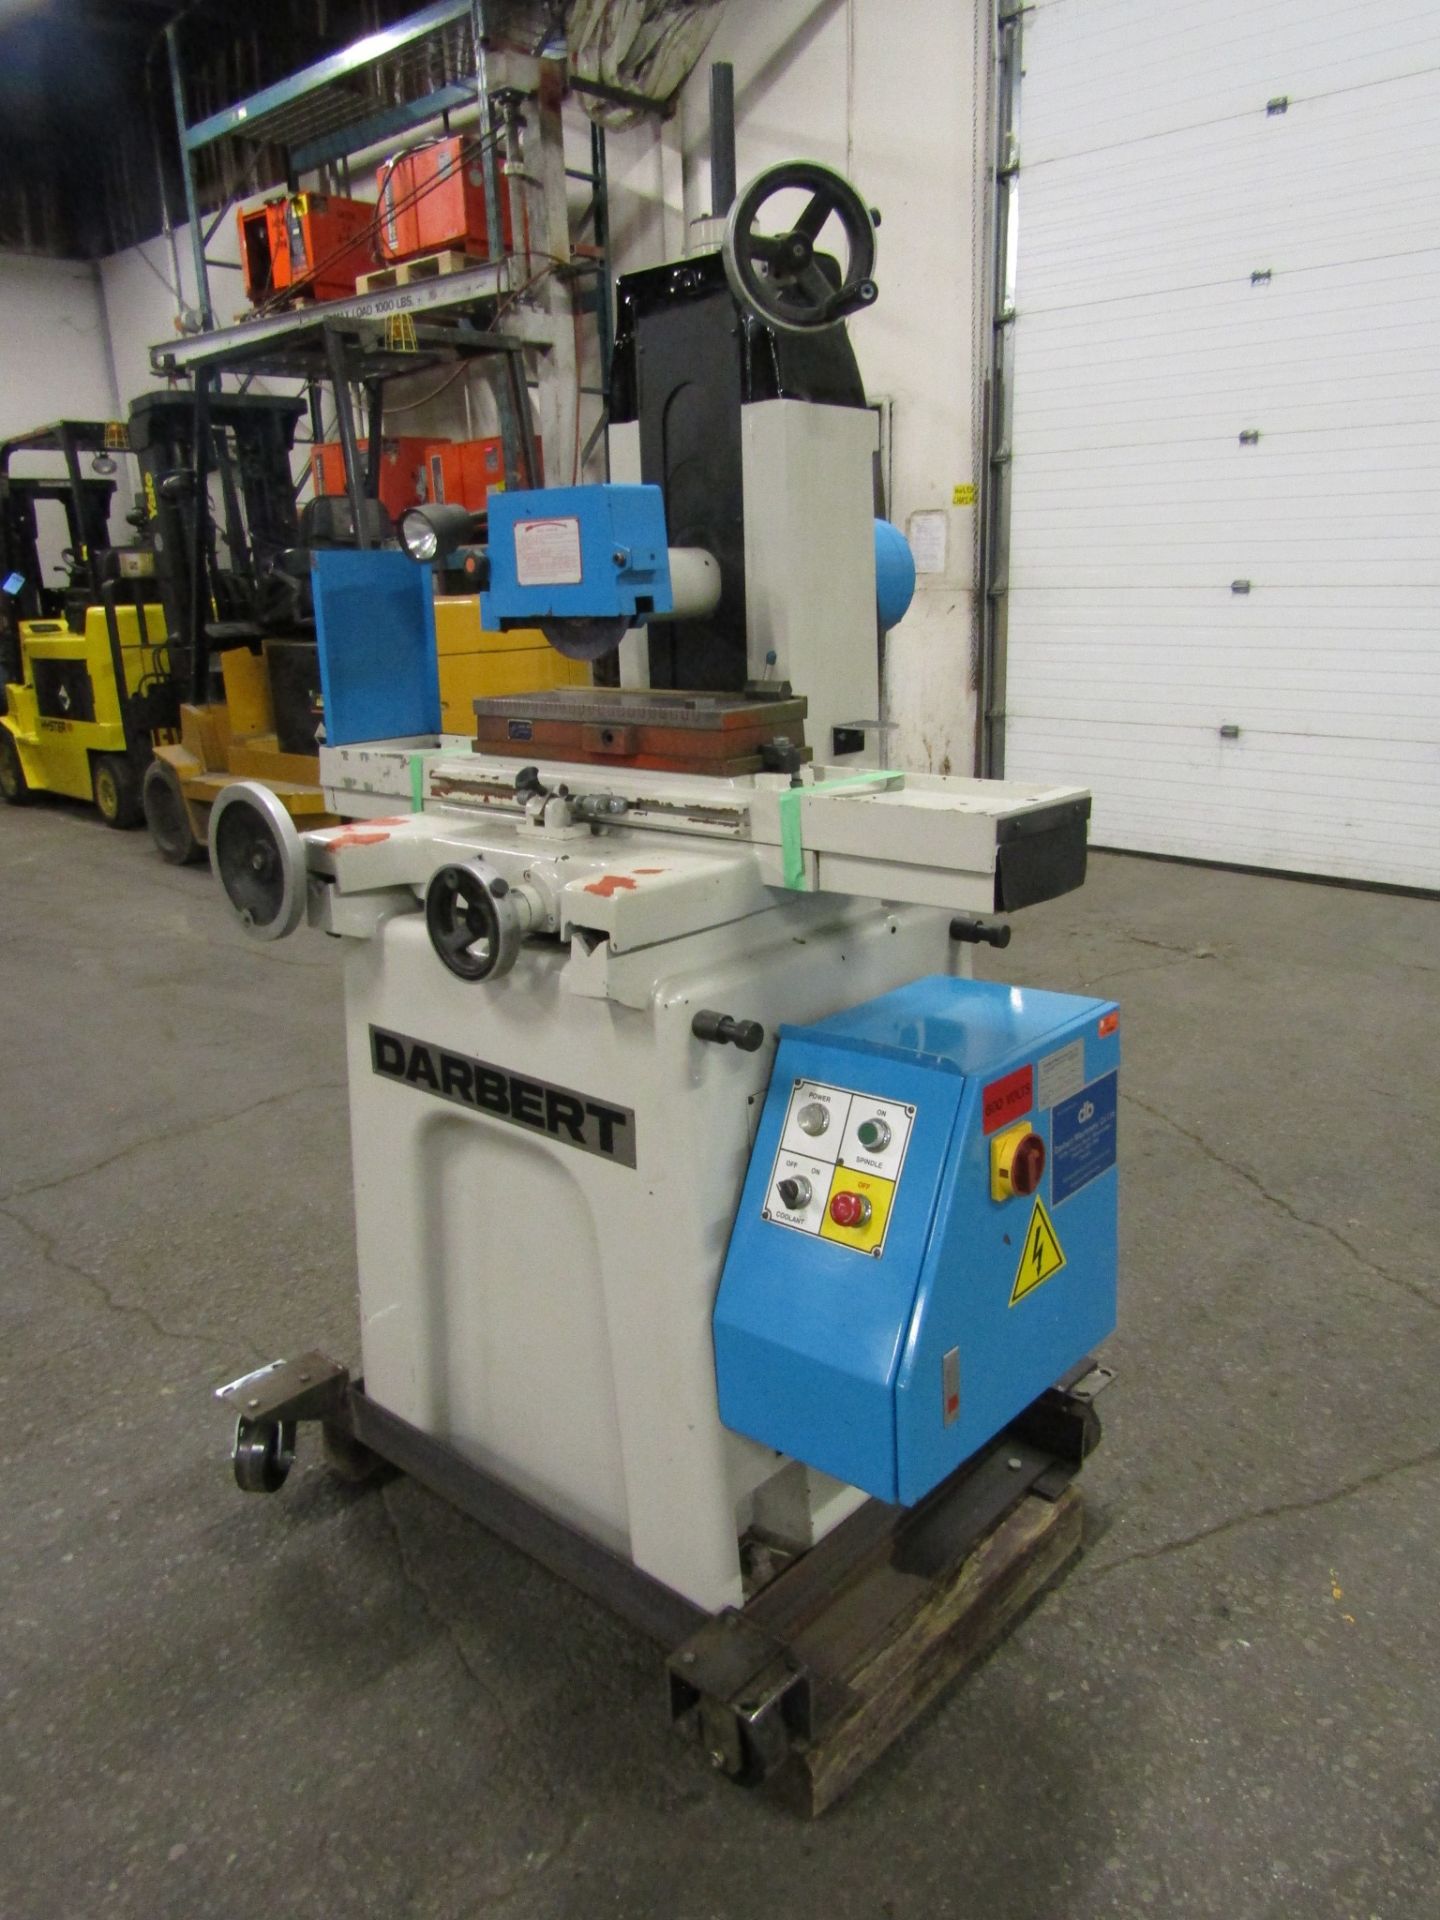 Darbert Surface Grinder model PFG-618B with 18" x 6" mag chuck - Image 3 of 3